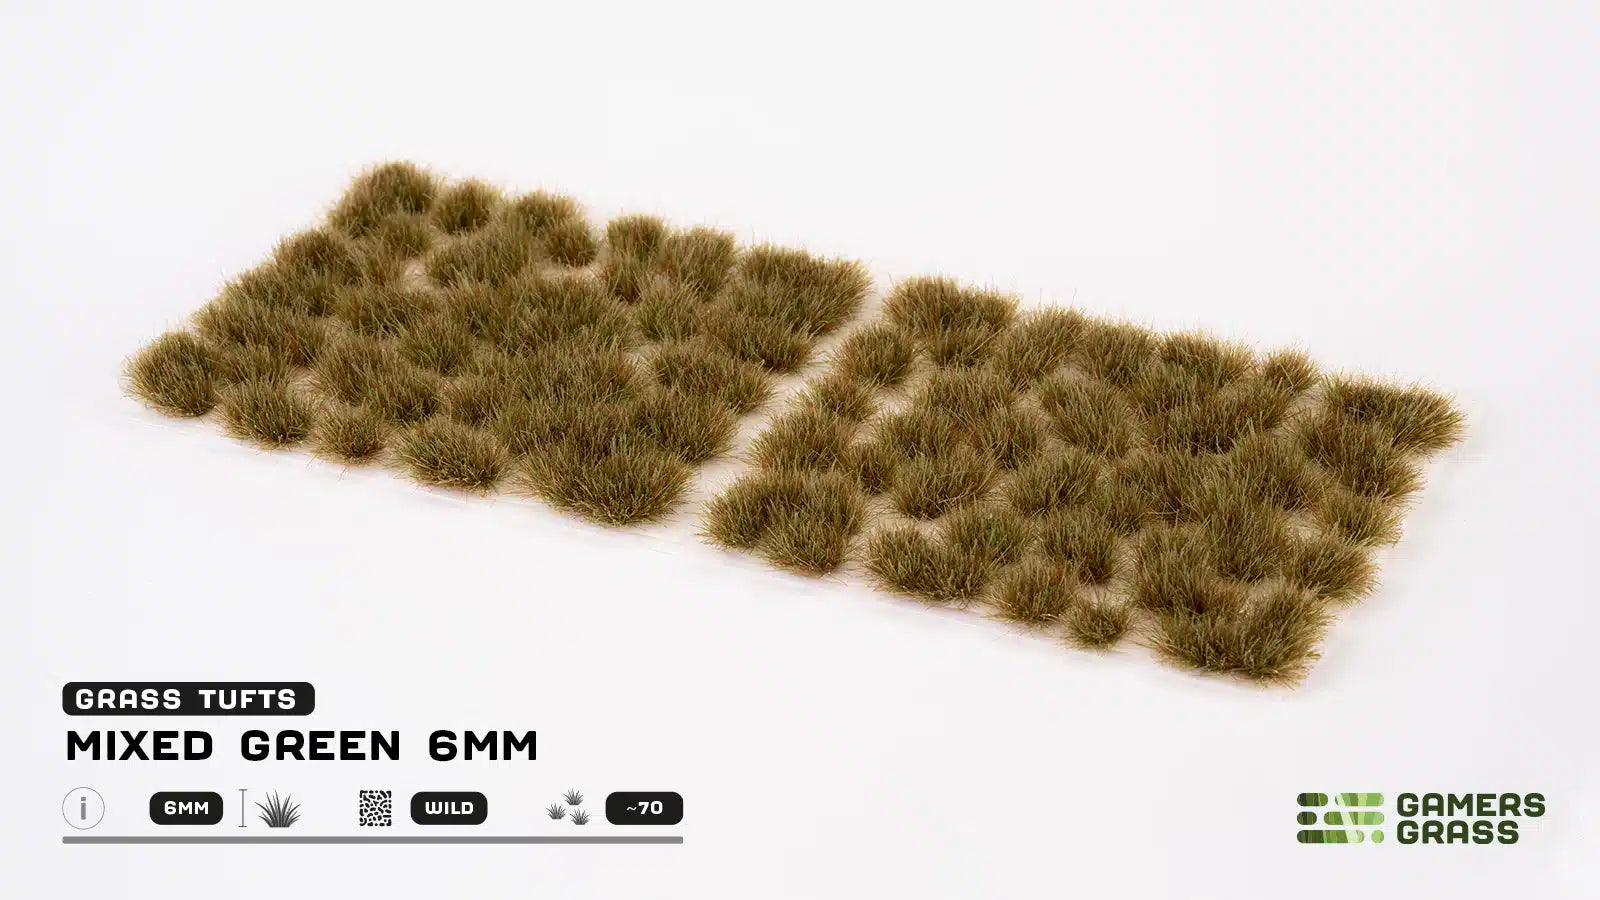 Mixed Green 6mm Tufts (Wild) - Gamers Grass